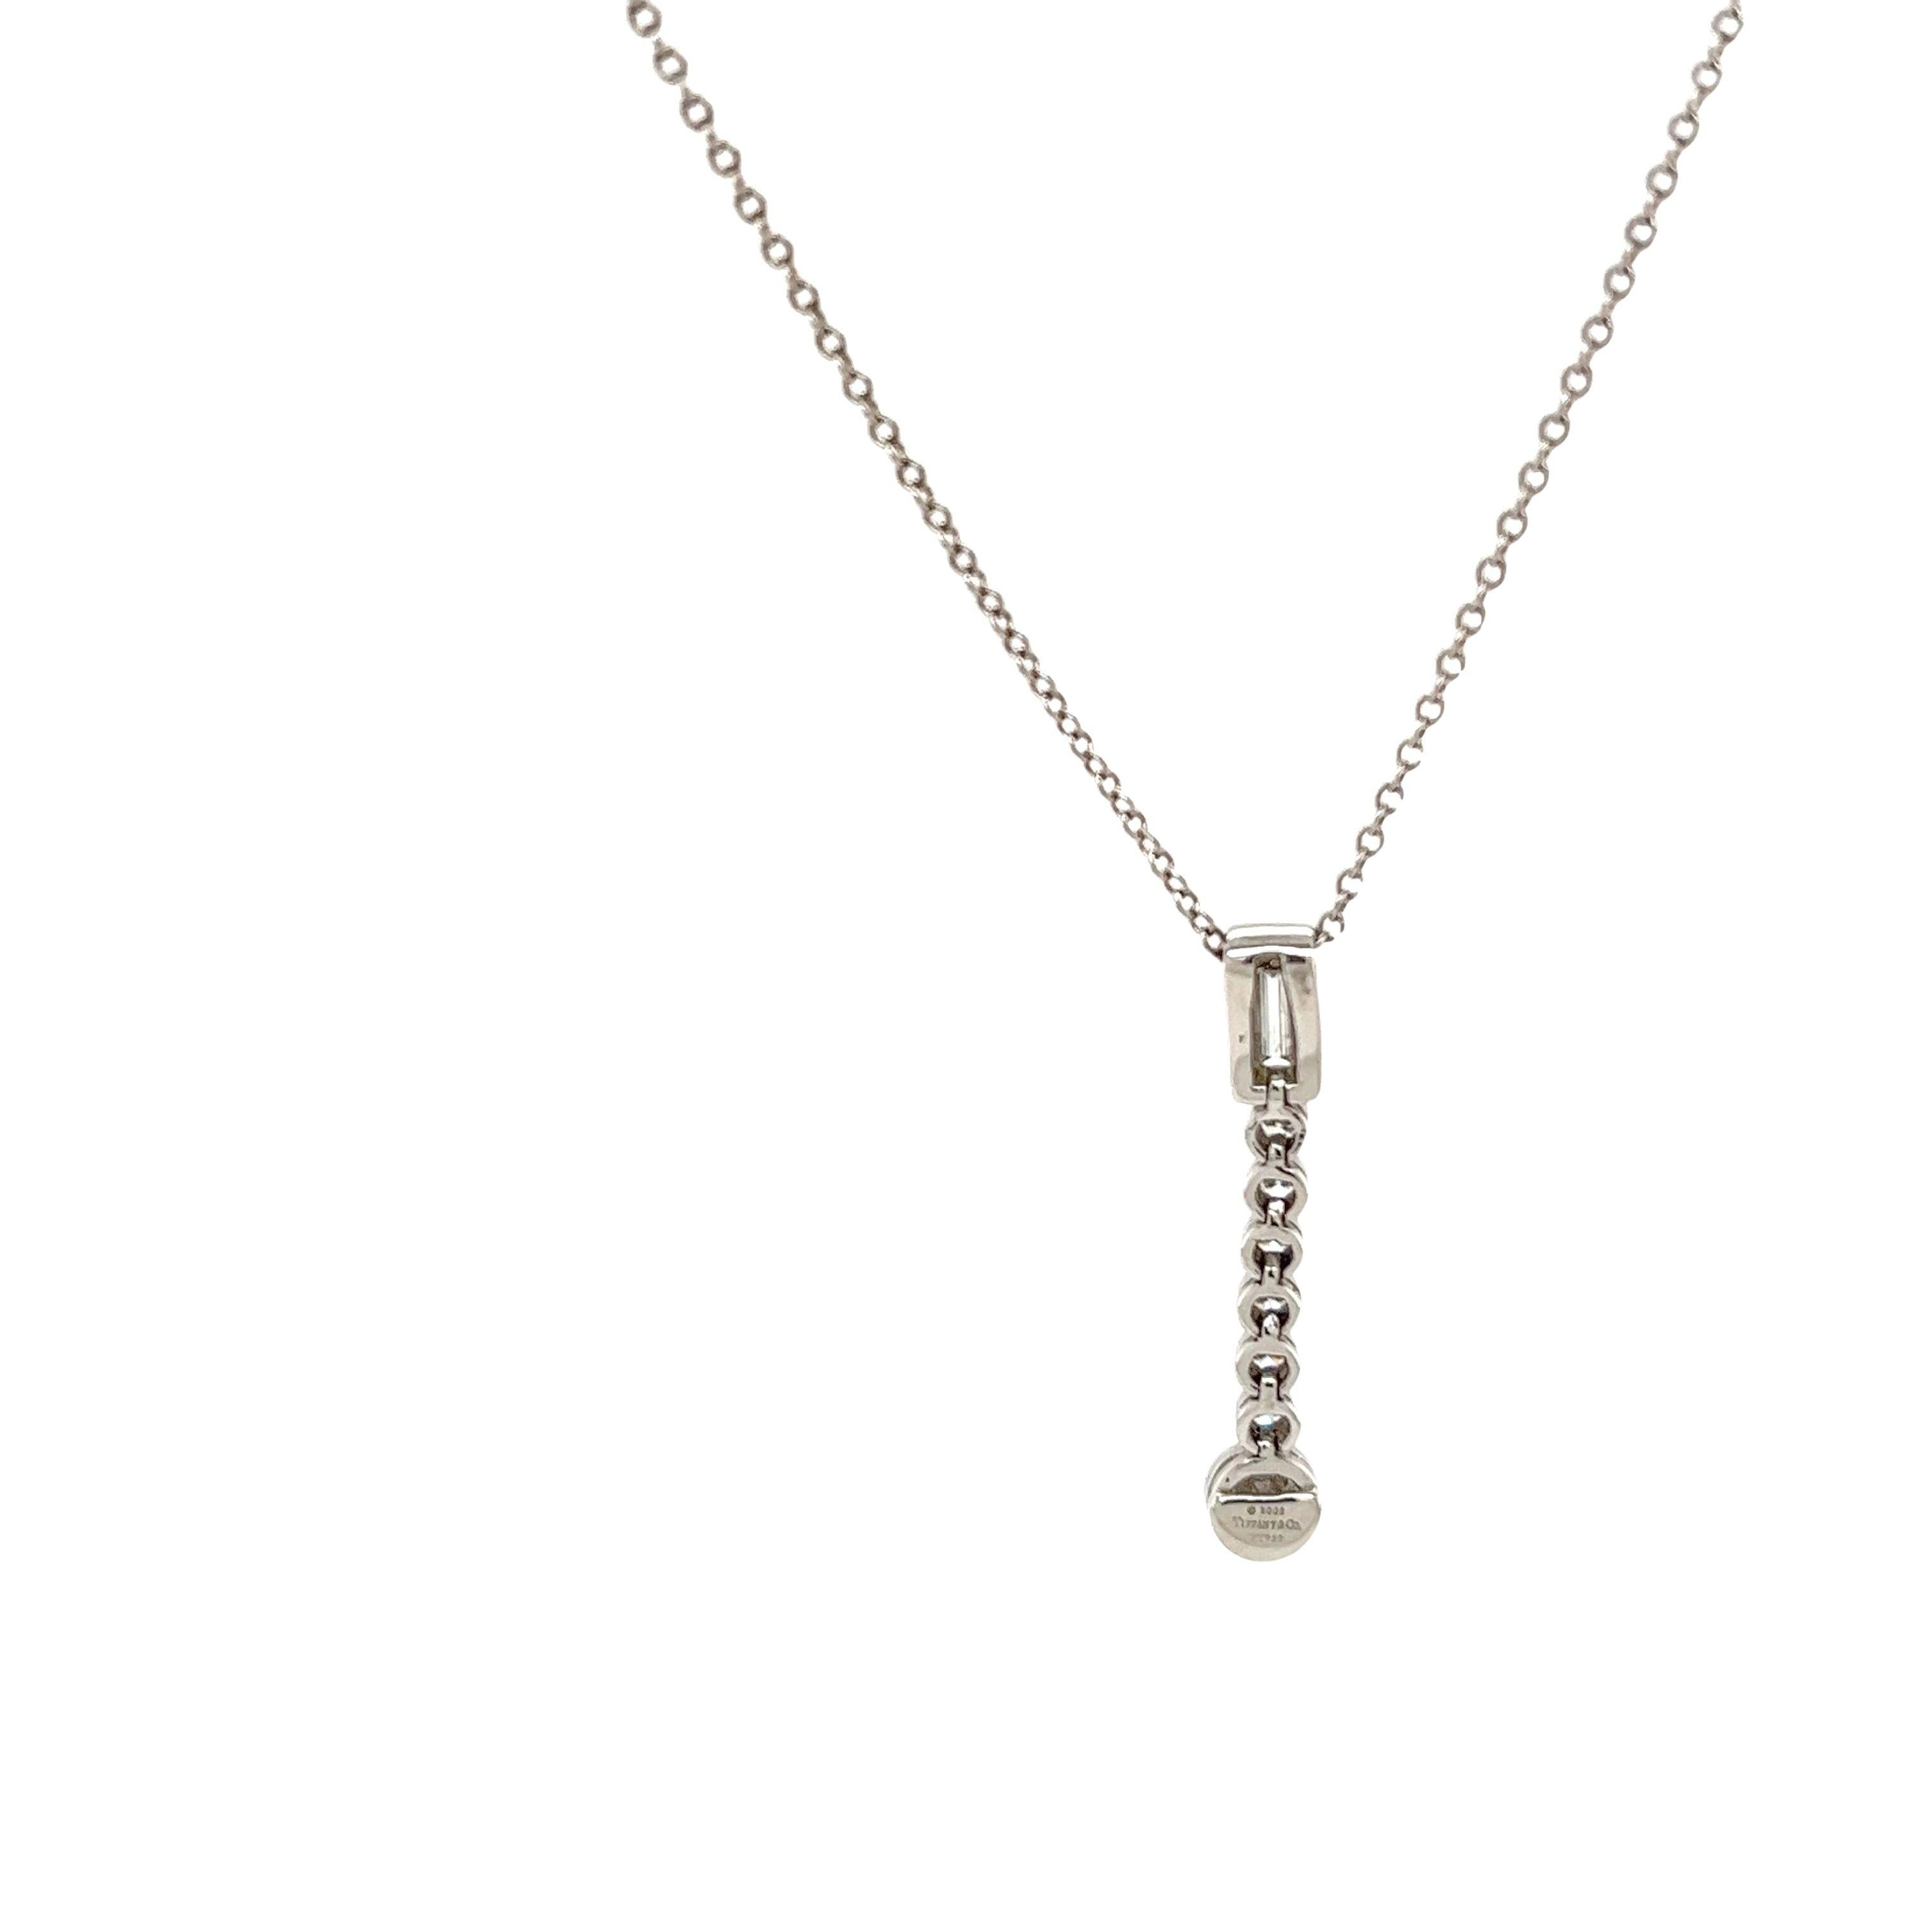 Embrace timeless elegance with this Tiffany Jazz diamond drop pendant, where luxury meets simplicity. Suspended on a delicate platinum chain, the linear progression of 7 round diamonds and 1 emerald cut diamond leads to a captivating centerpiece